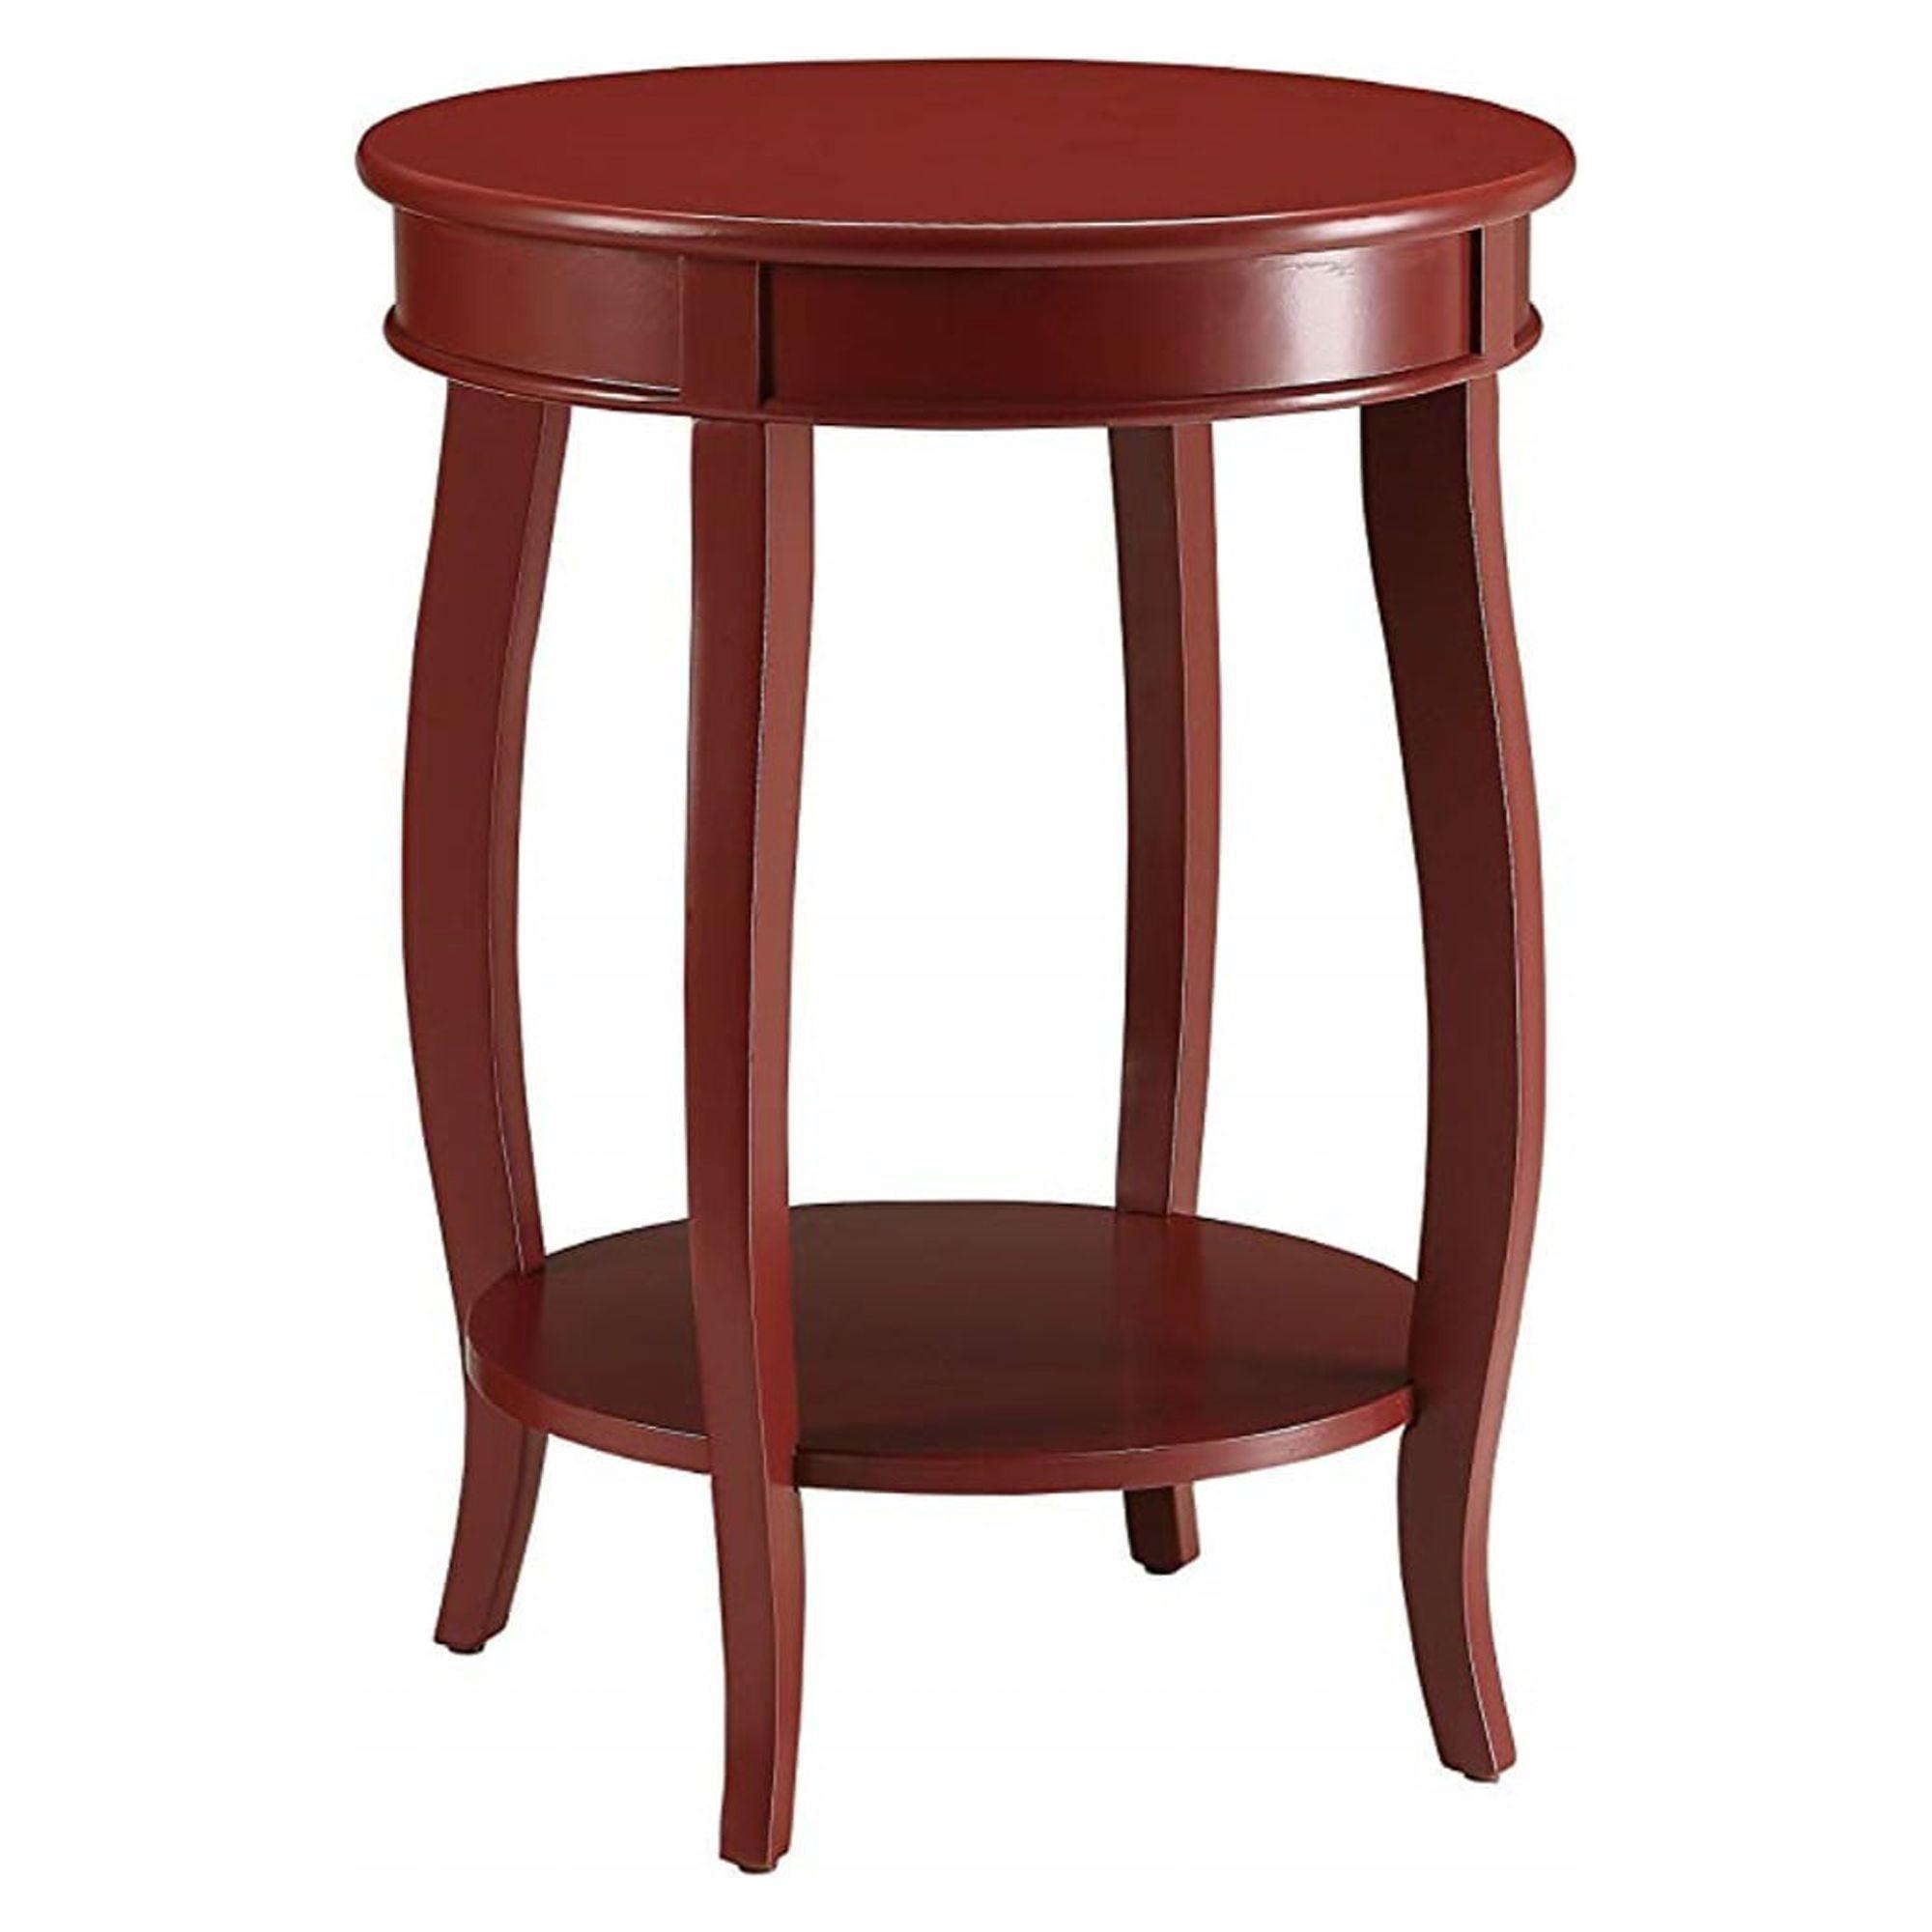 Elegant Stylized Leg Round Wood Side Table in Red